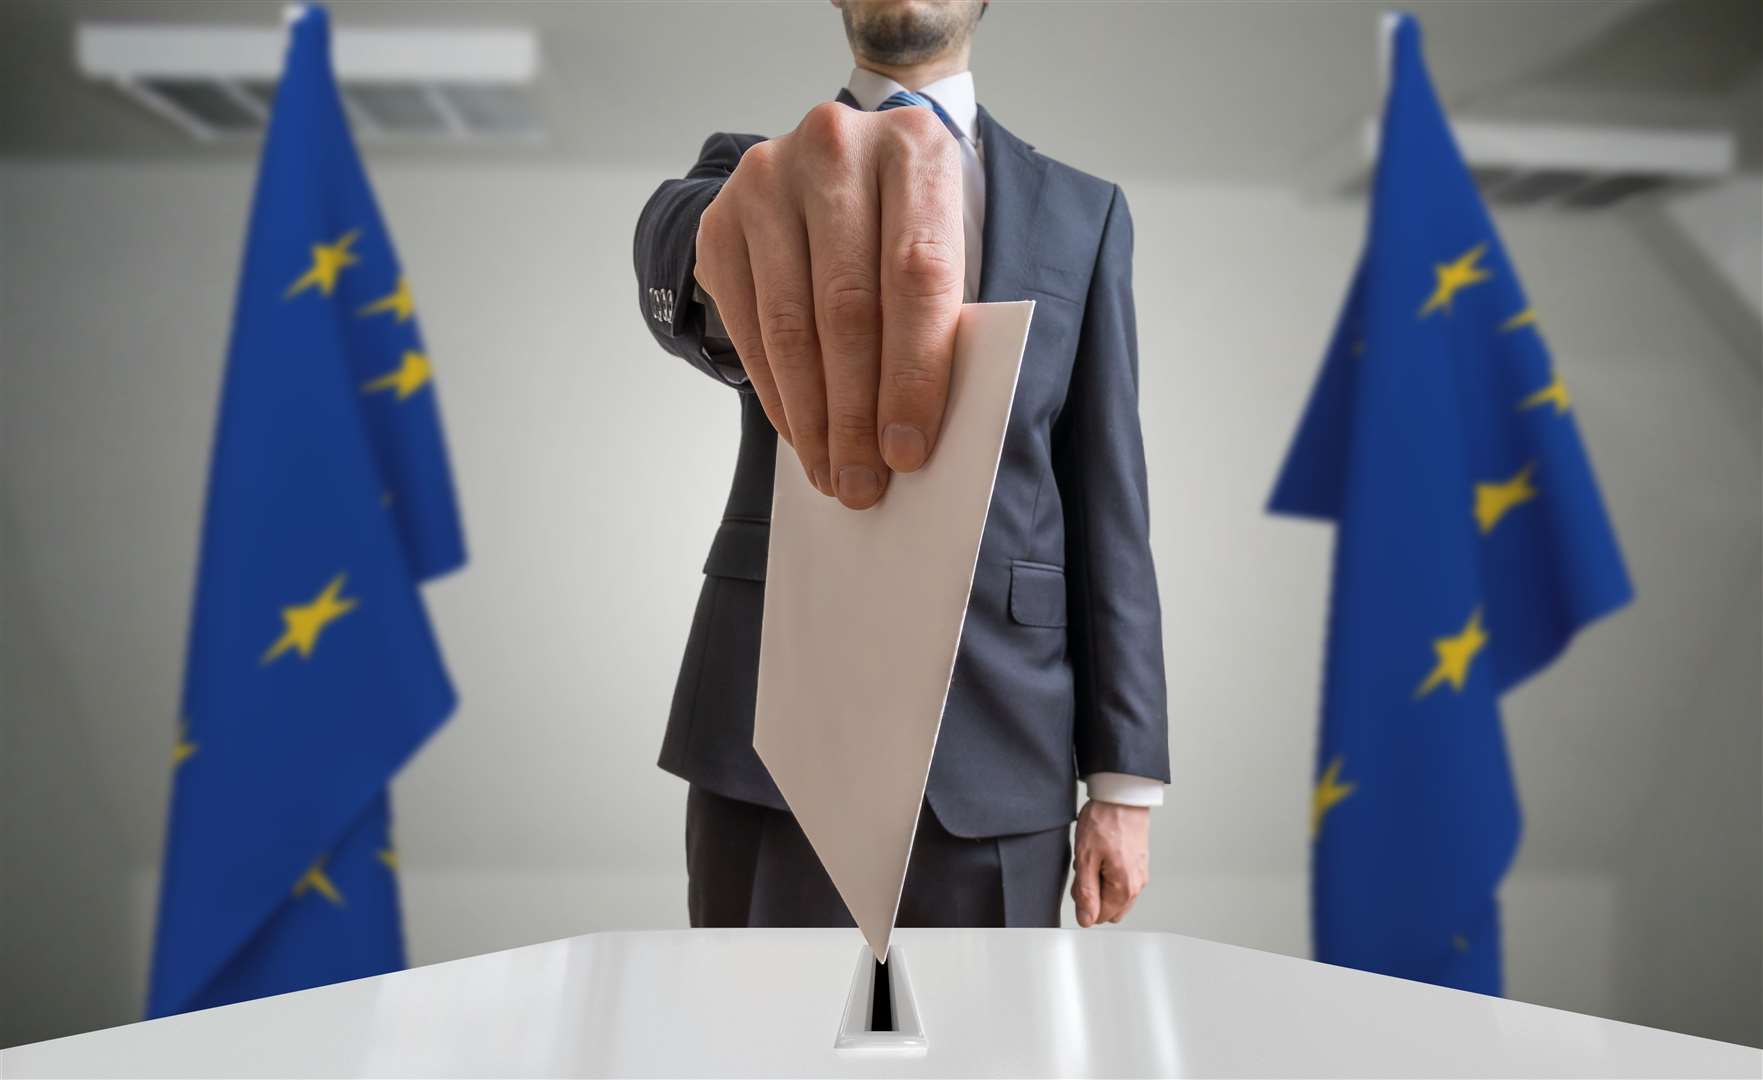 Voting in the European Elections takes place on Thursday.